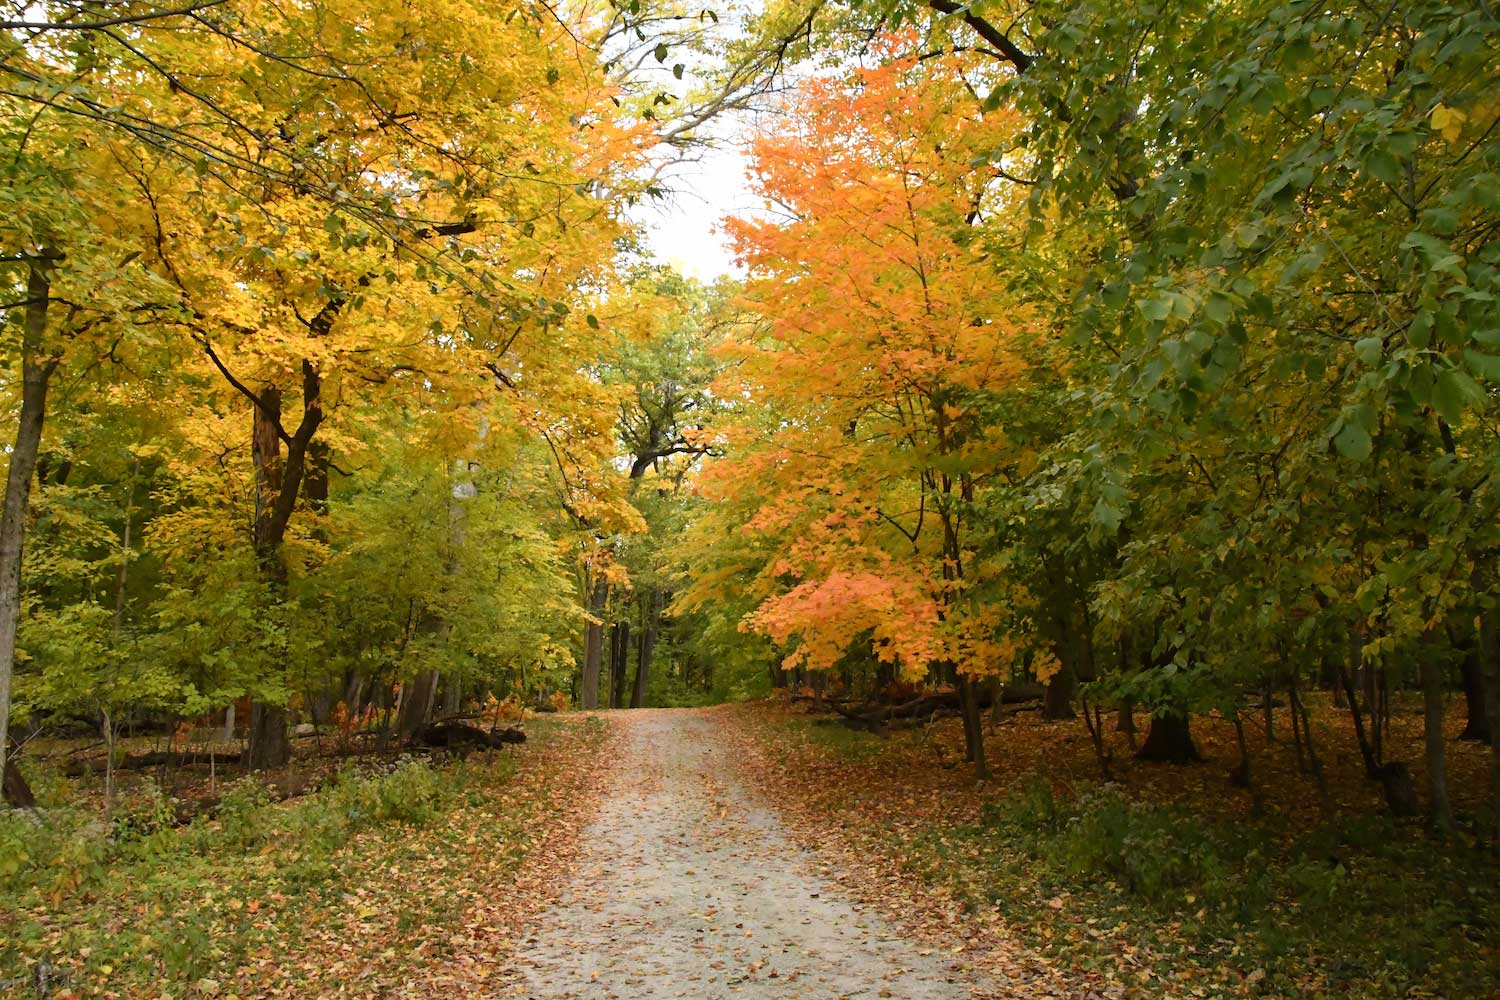 A trail lined with leaves changing to shades of yellow and orange.